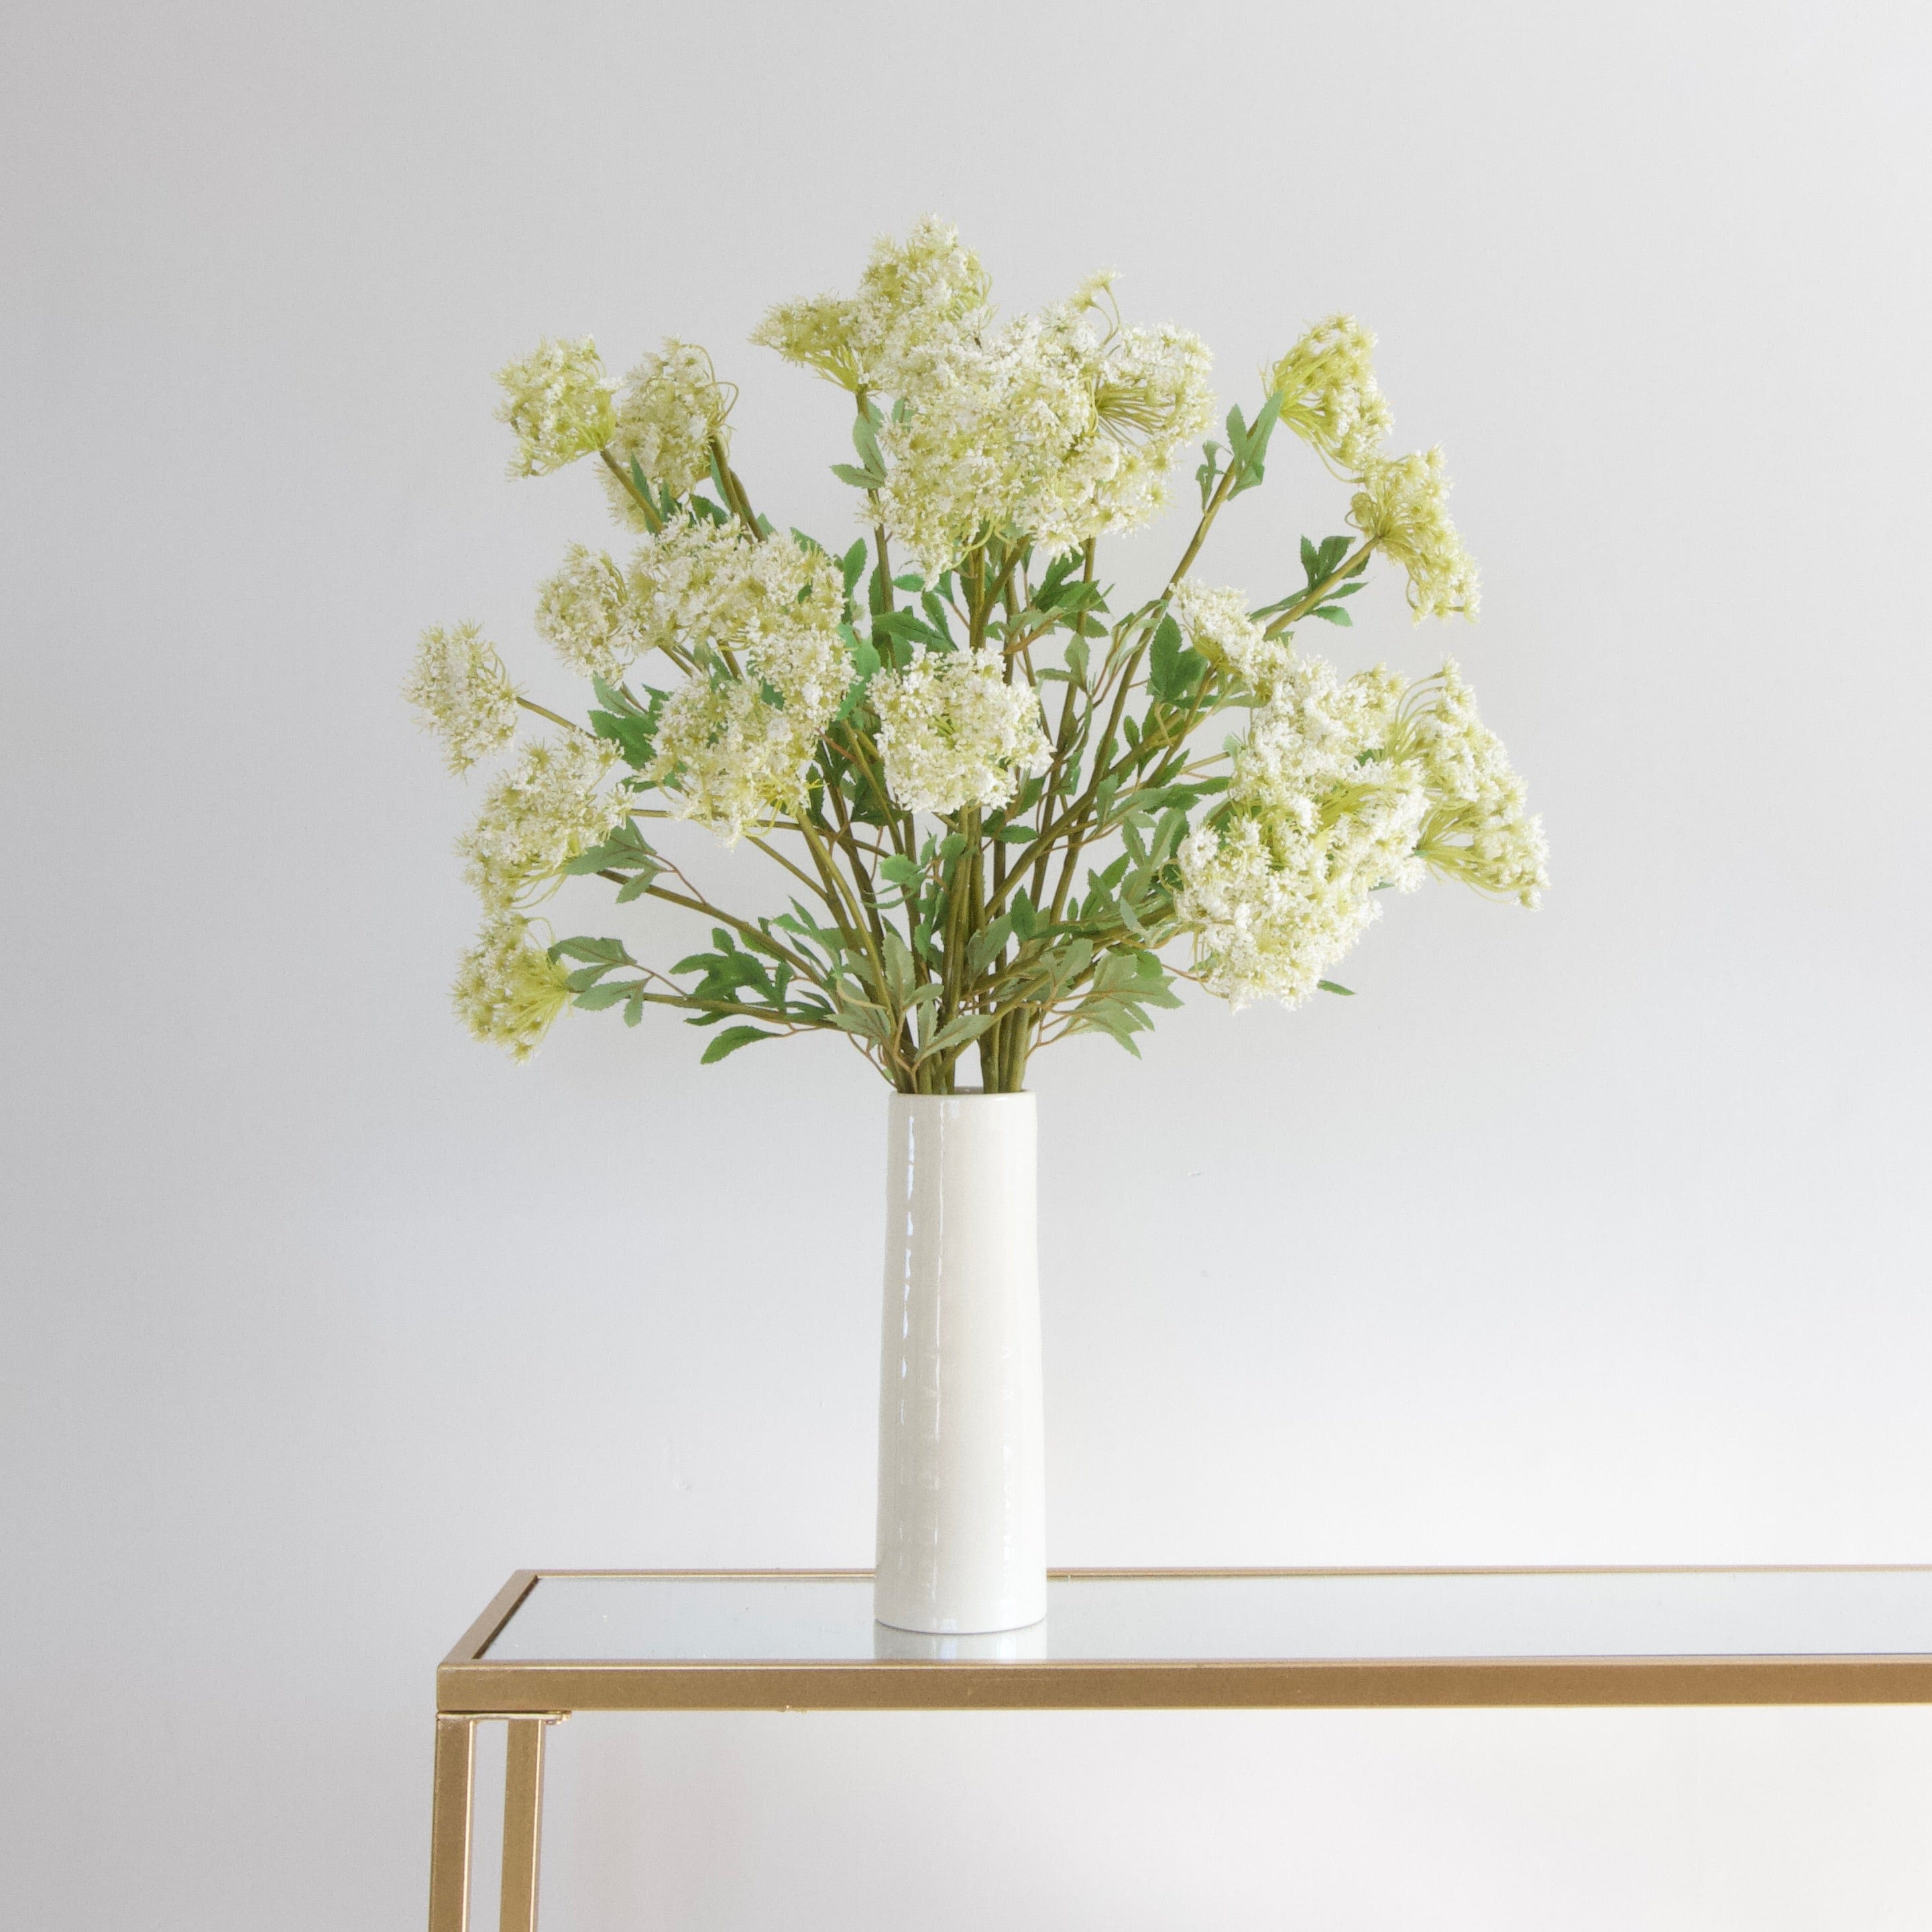 Luxury Lifelike Realistic Artificial Fabric Silk Blooms with Foliage Buy Online from The Faux Flower Company | 10 stems White Cow Parsley Spray ABX6597WH in Prestbury Vase